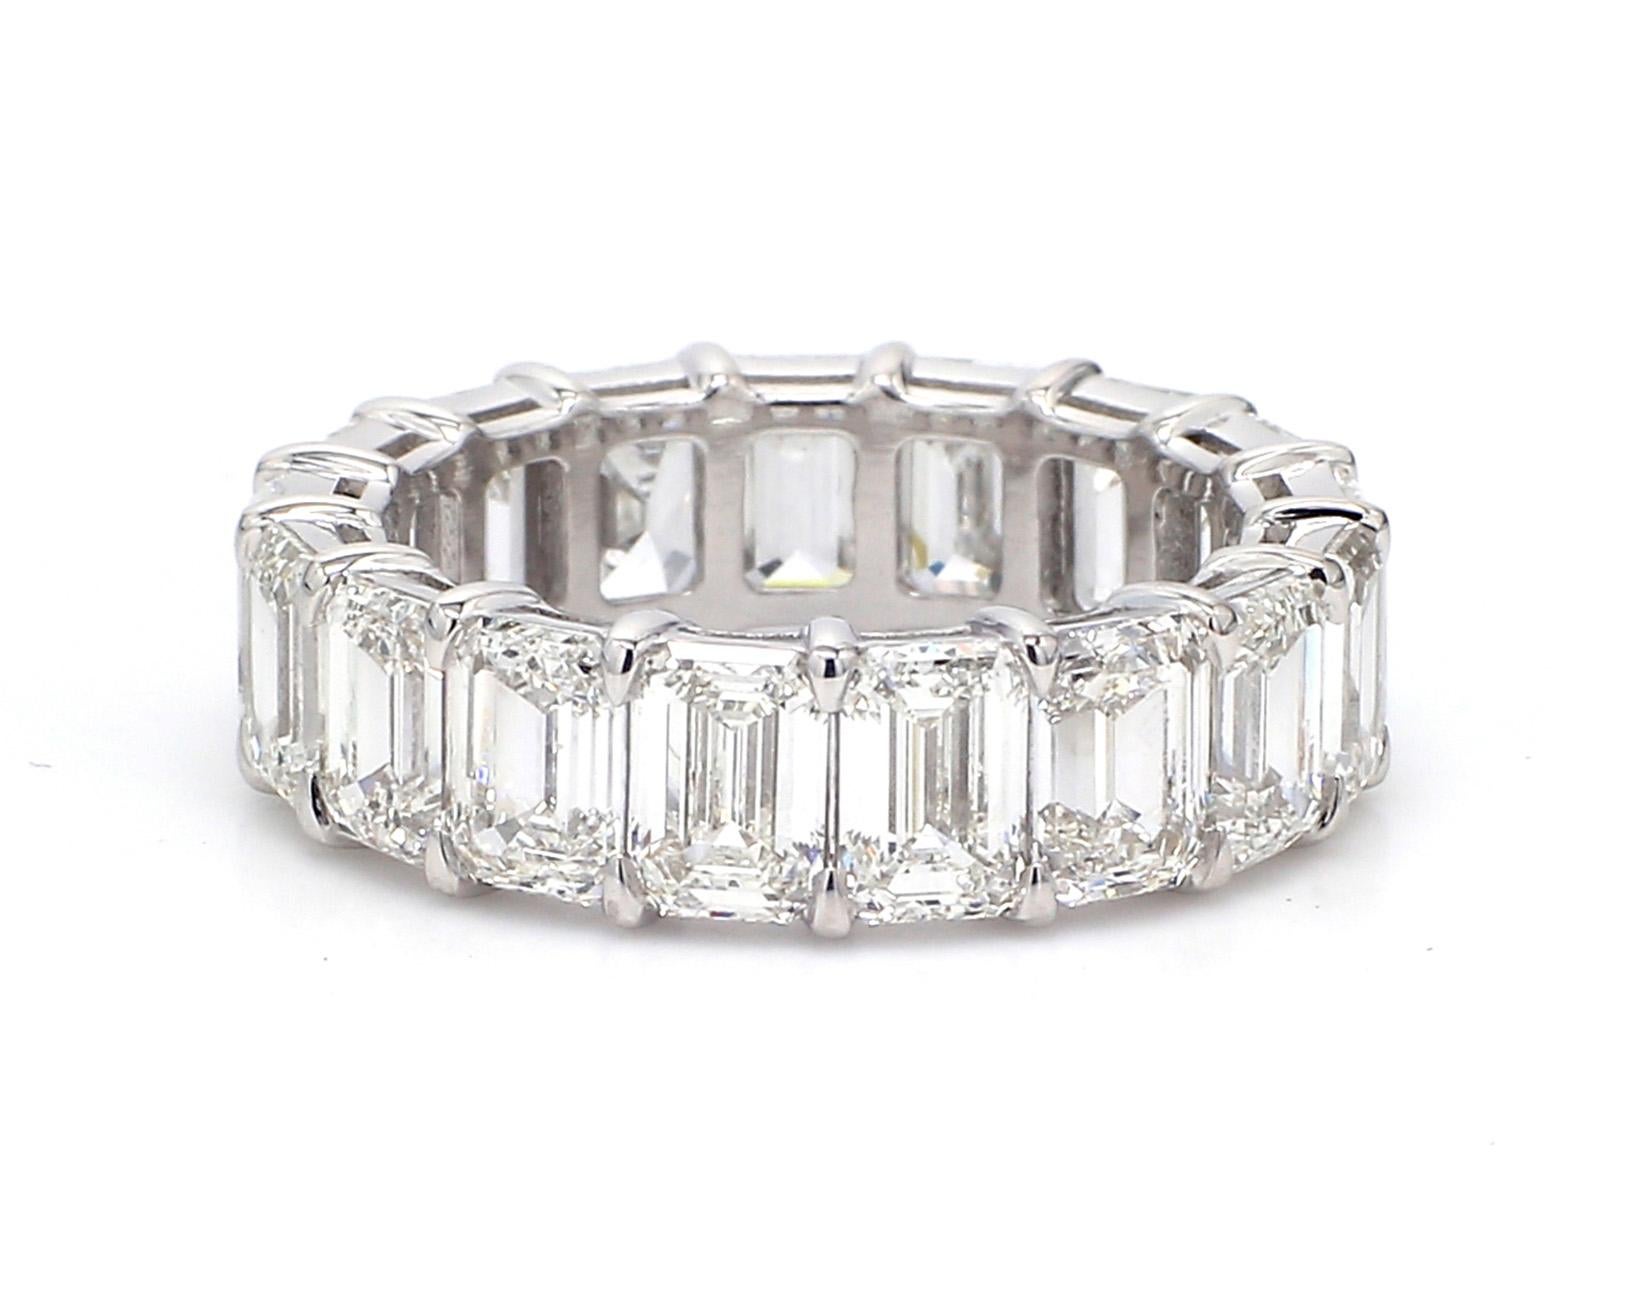 Eternity band in platinum with double basket claw set GIA certified G-H/VVS2-VS2 emerald cut diamonds. D8.57ct.